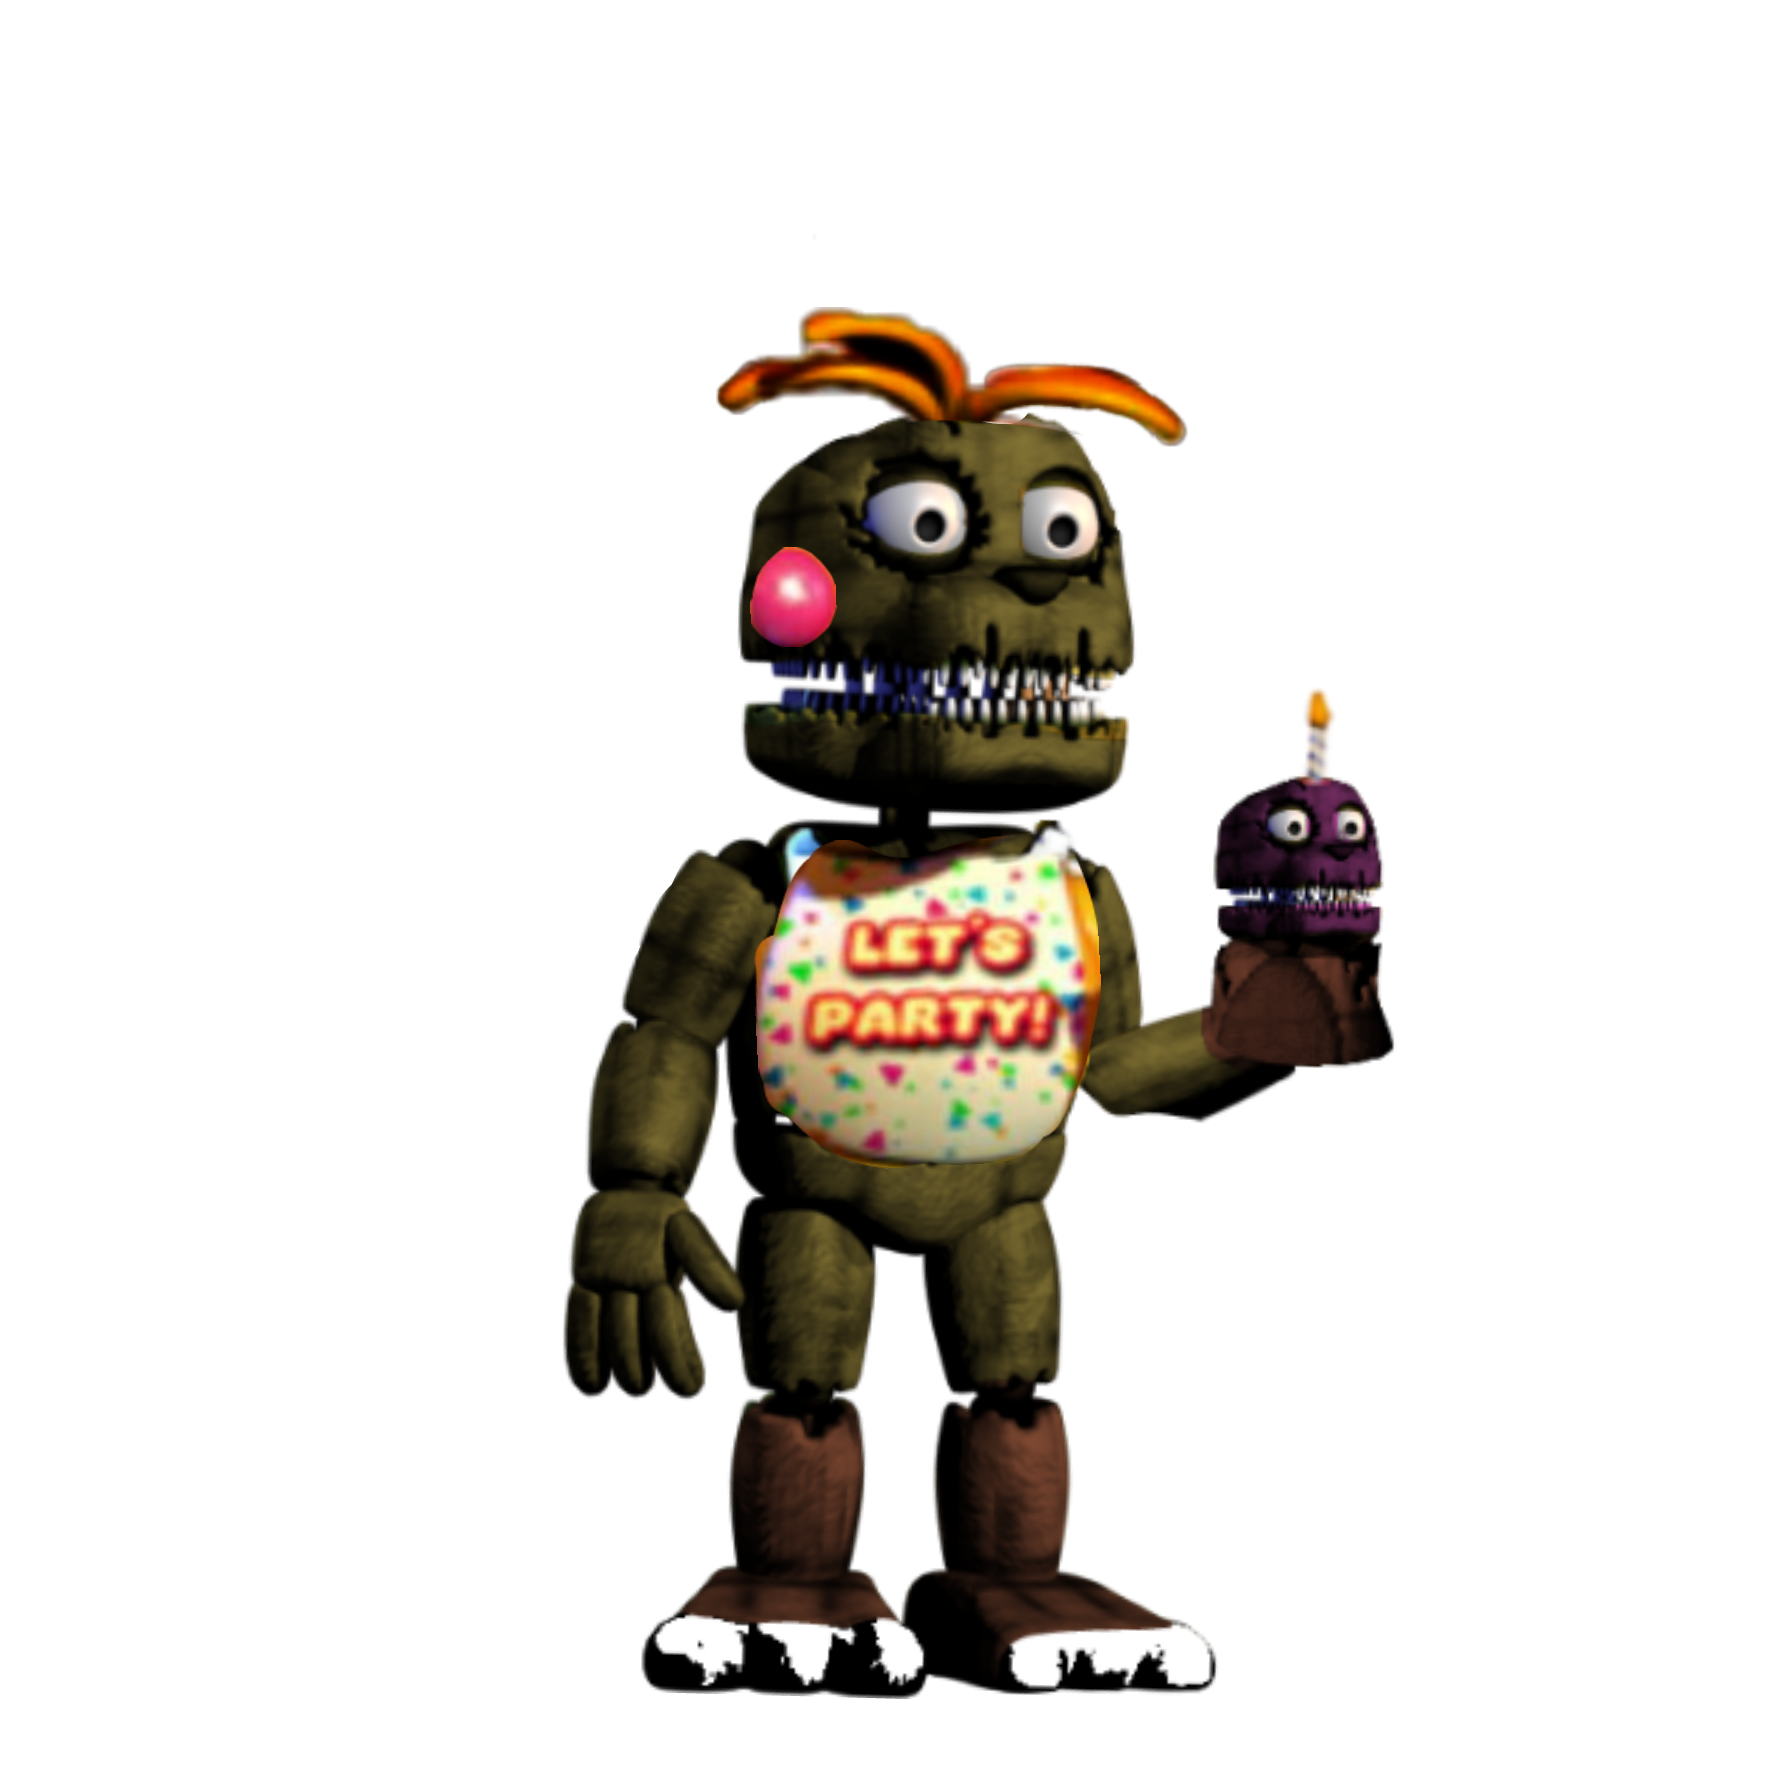 This visual is about toychica freetoedit #toychica Plushtrap Toy Chica.